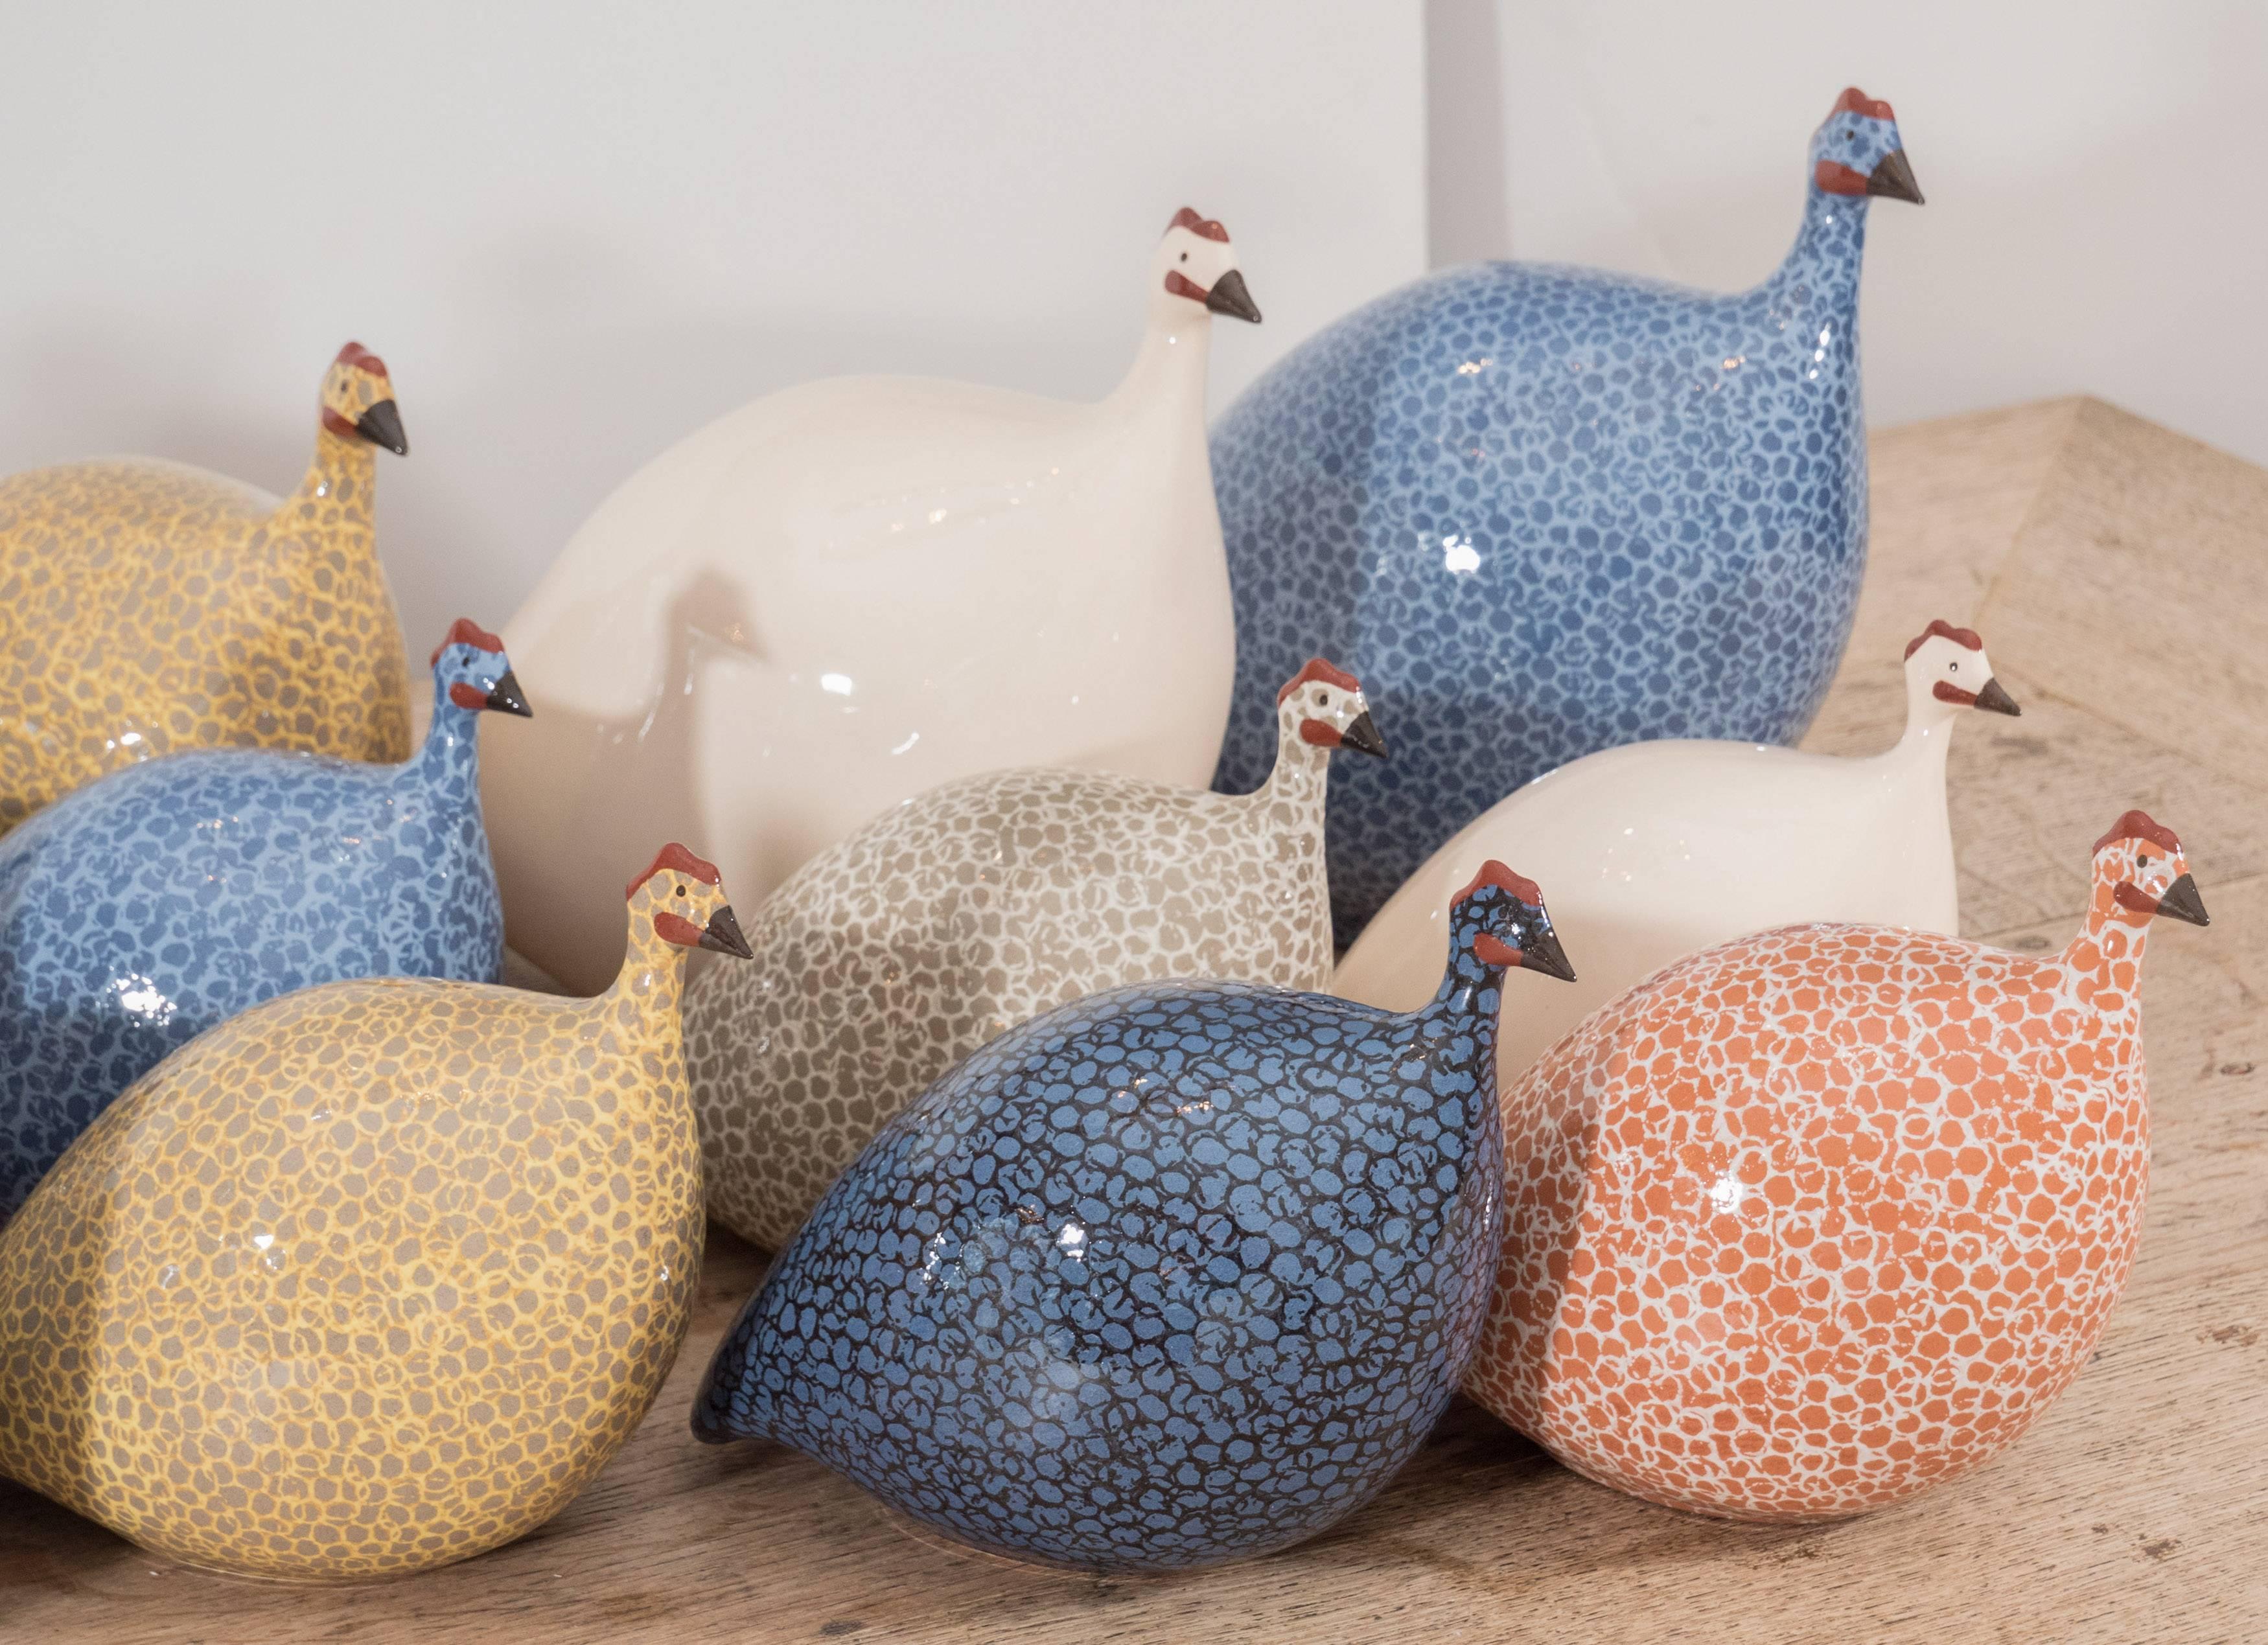 A charming group of ceramic guinea hens in different sizes and colors. These look great as singles or in a grouping, and are a wonderful accessory in a kitchen, family room or anywhere. Made in France and painted by hand. Small ($180) Please contact